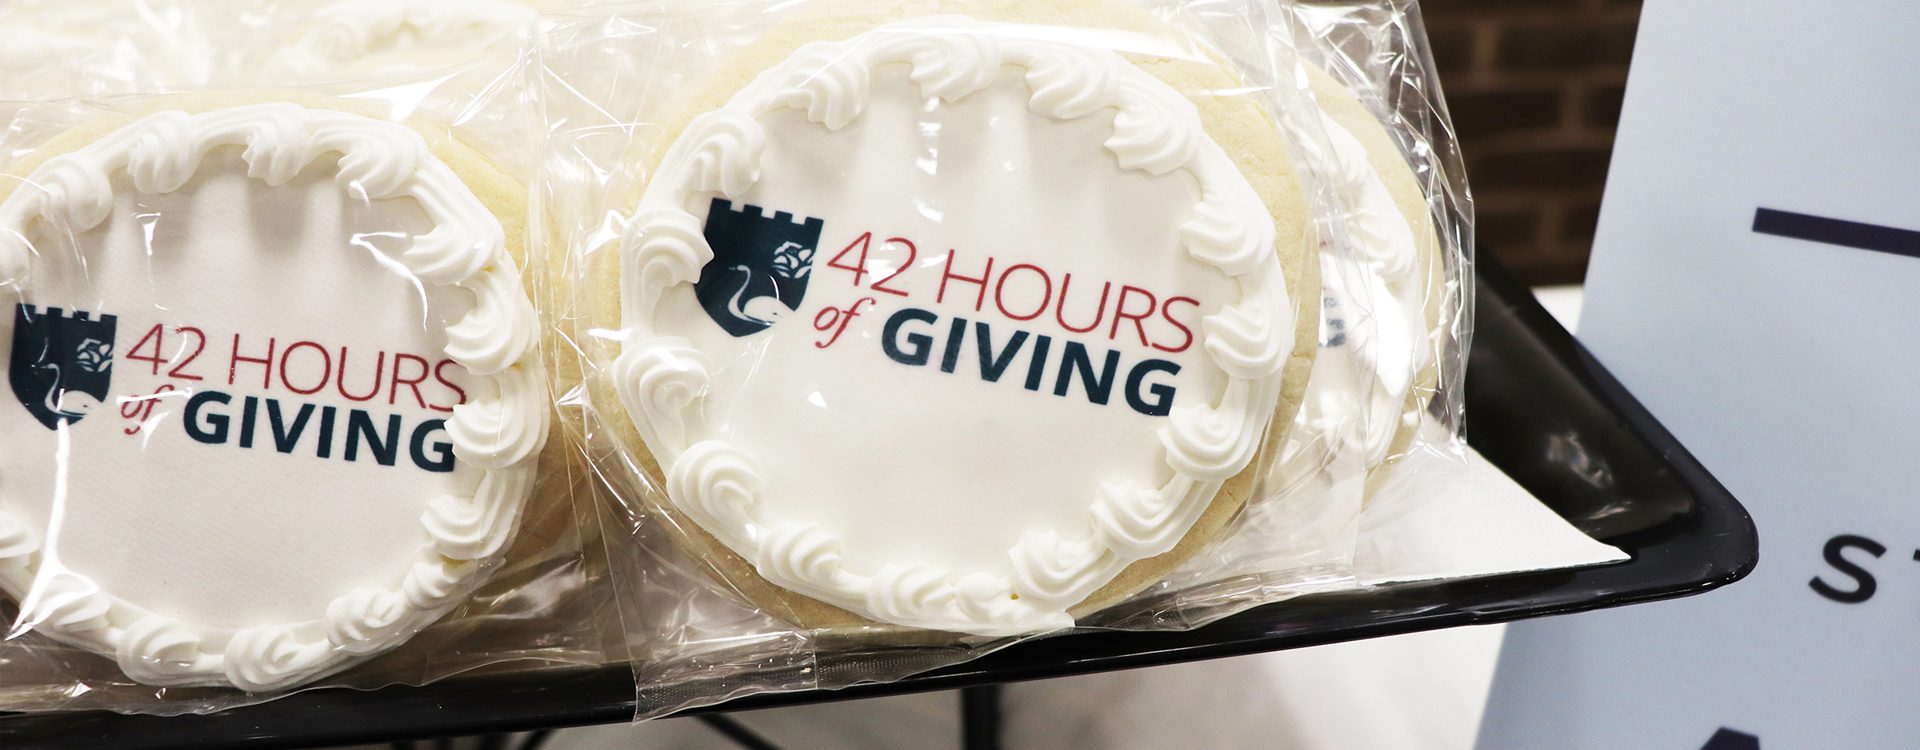 42_hours_of_giving_cookies